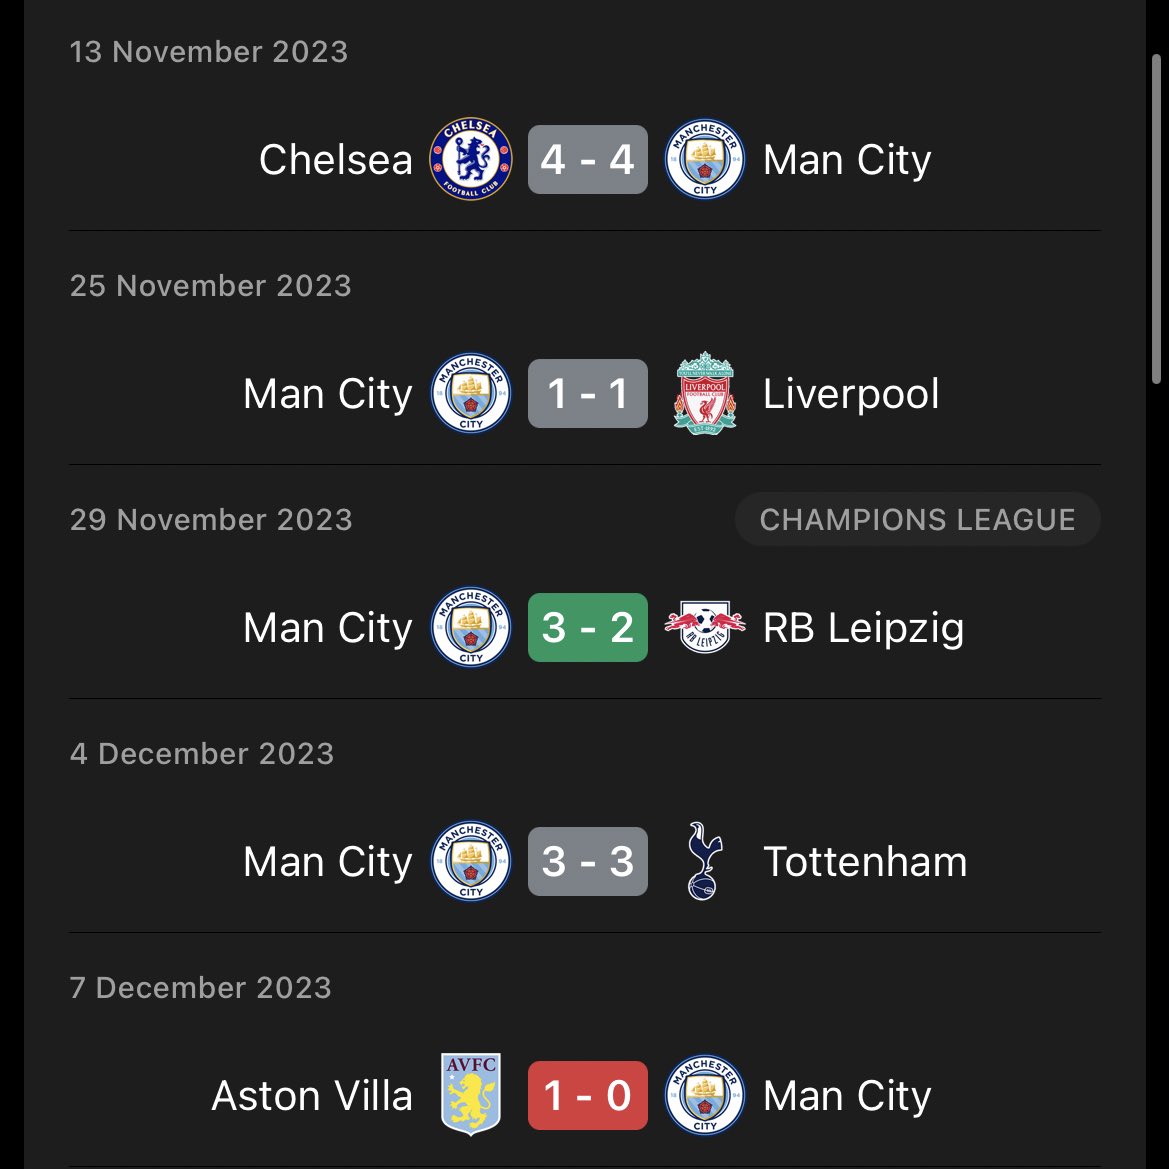 The League isn’t unfair, you just couldn’t take advantage of Manchester City slipping up